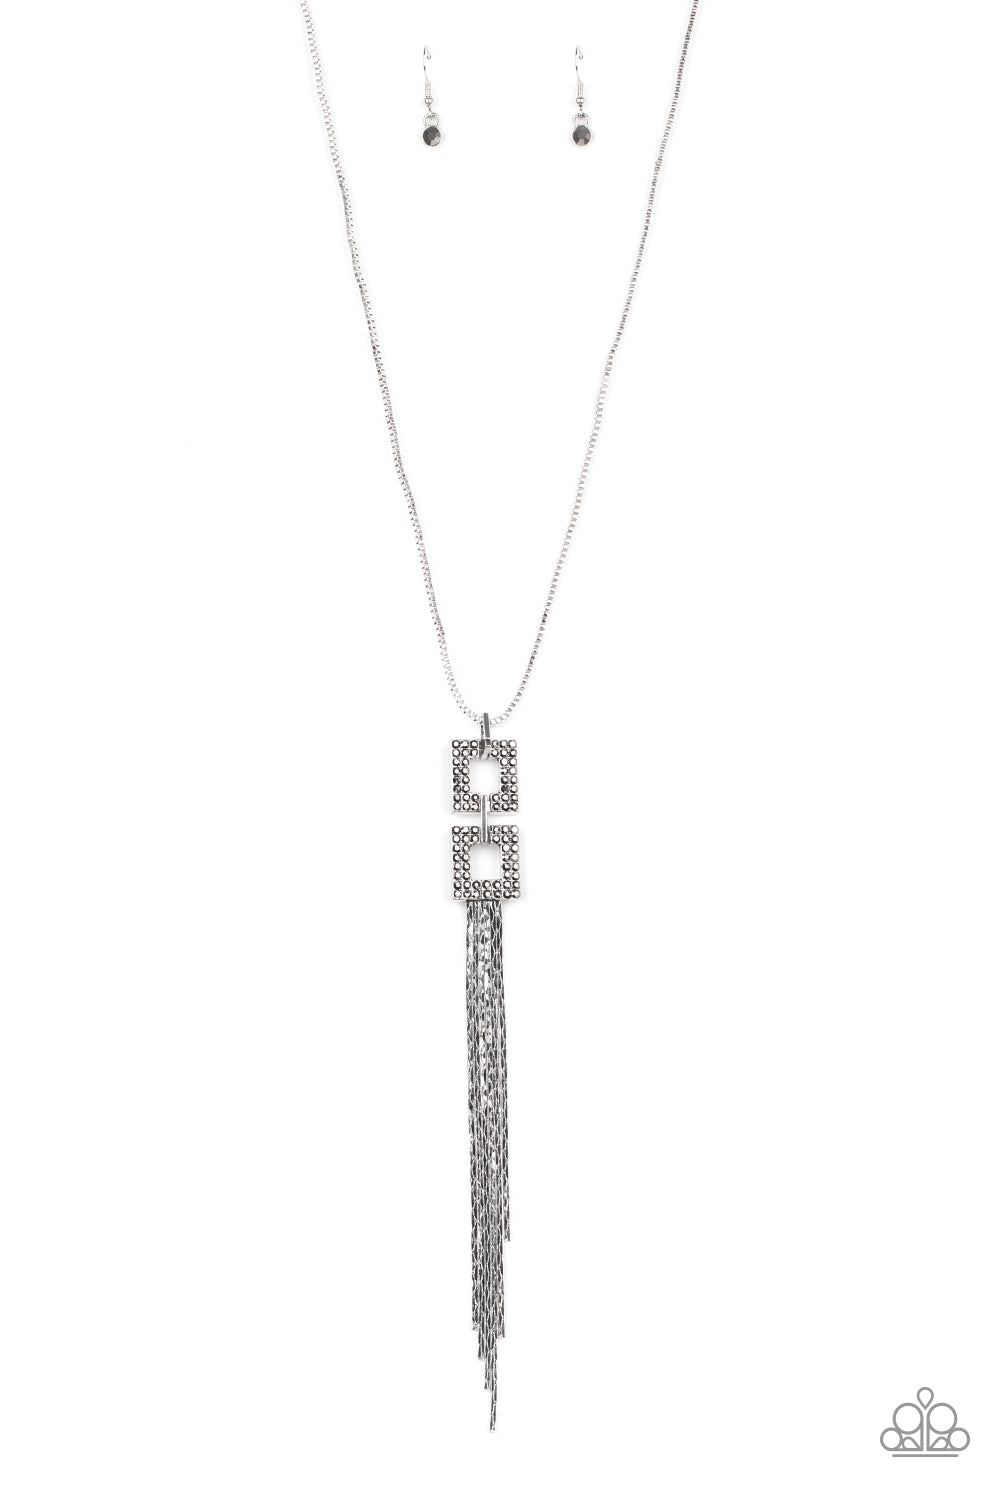 Times Square Stunner Silver Necklace - Paparazzi Accessories